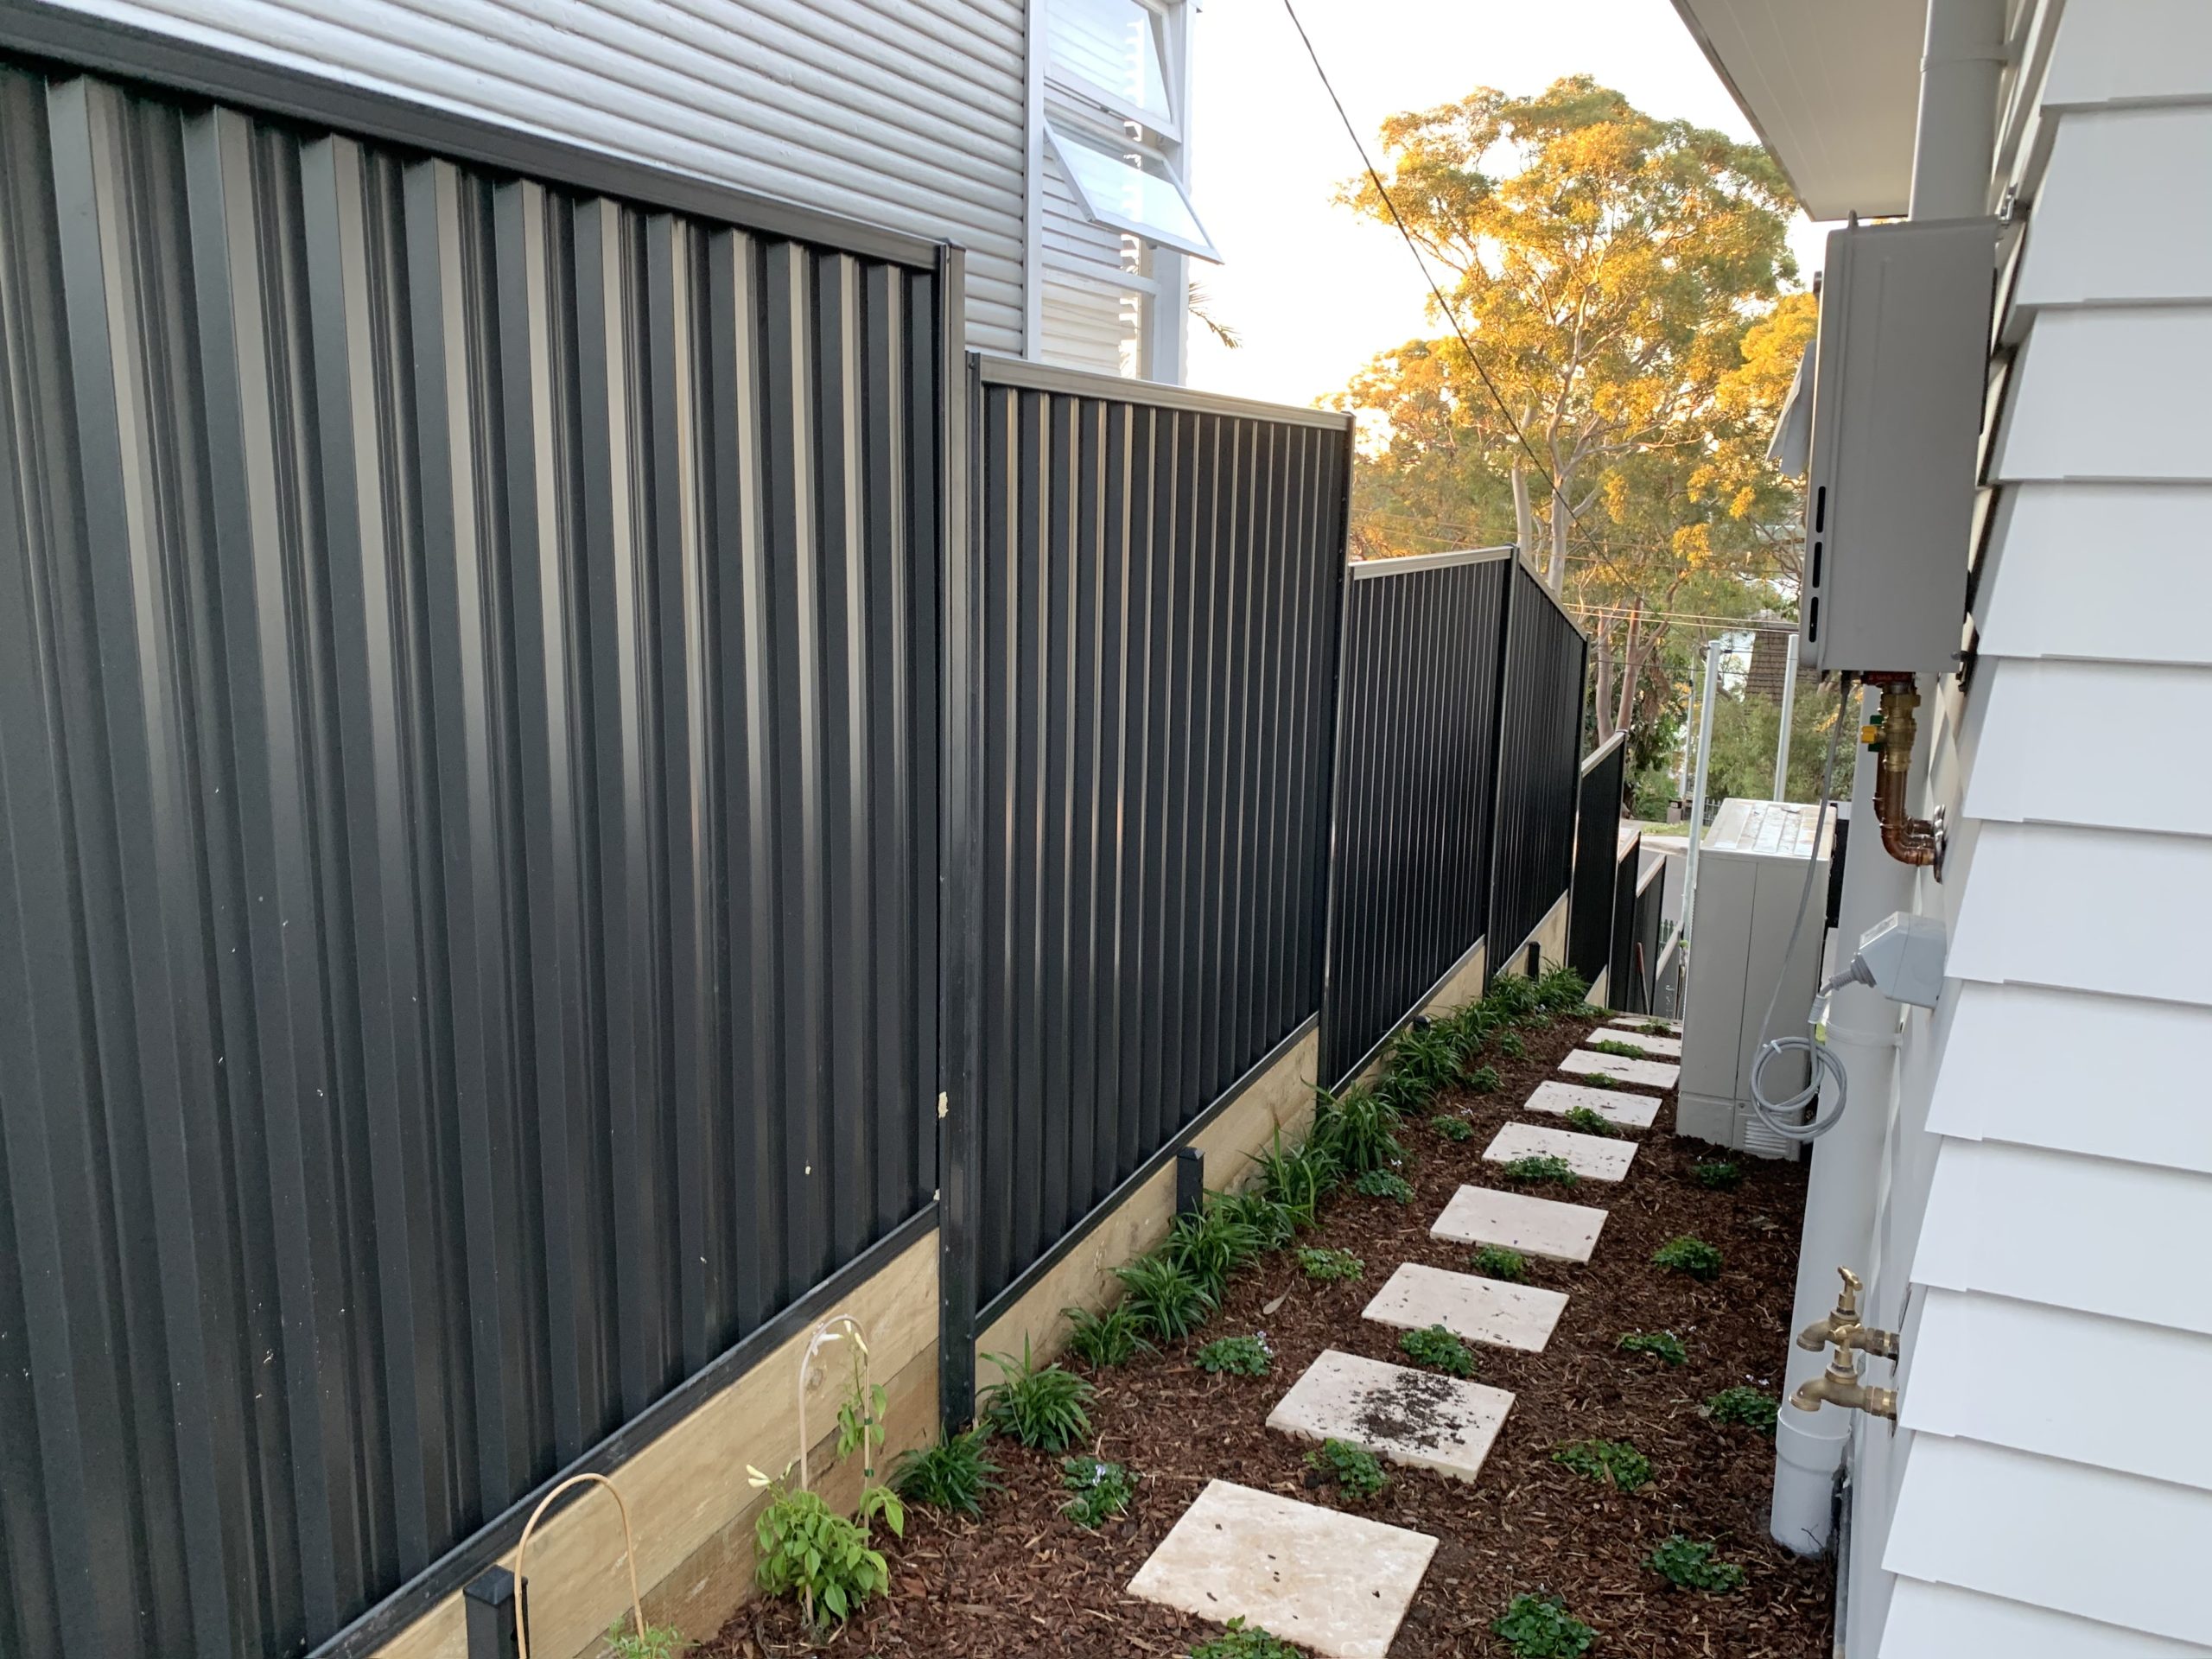 Colorbond Fencing with Treated Pine Sleepers